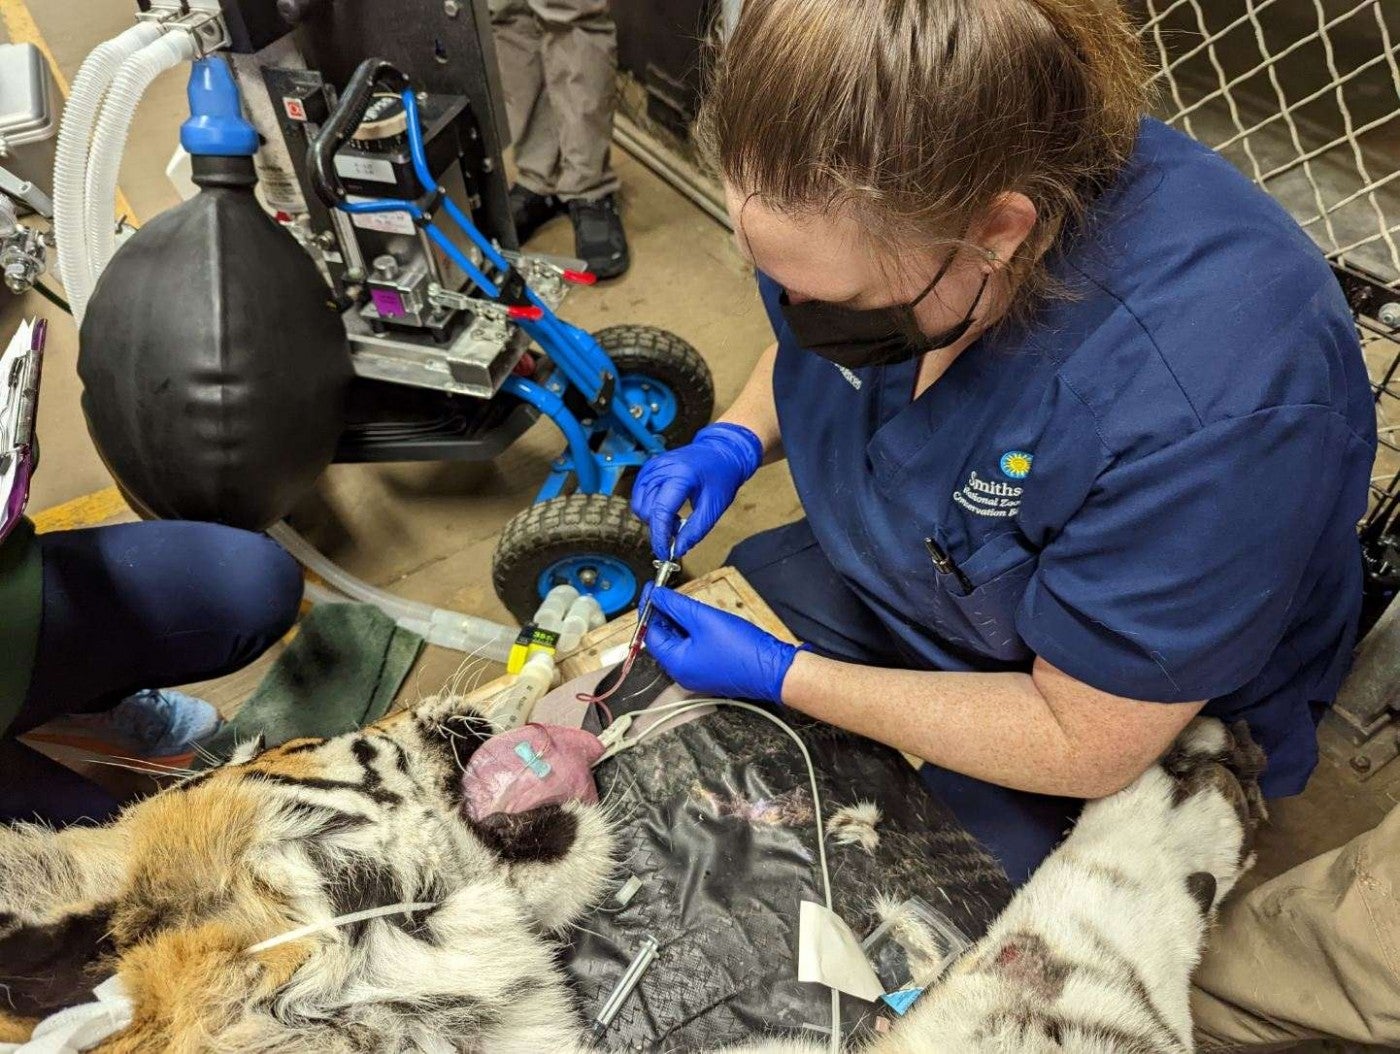 An Amur tiger undergoes an exam under anesthesia at the Great Cats exhibit. Jayne Hutcheson draws blood from the tiger’s sublingual vein.